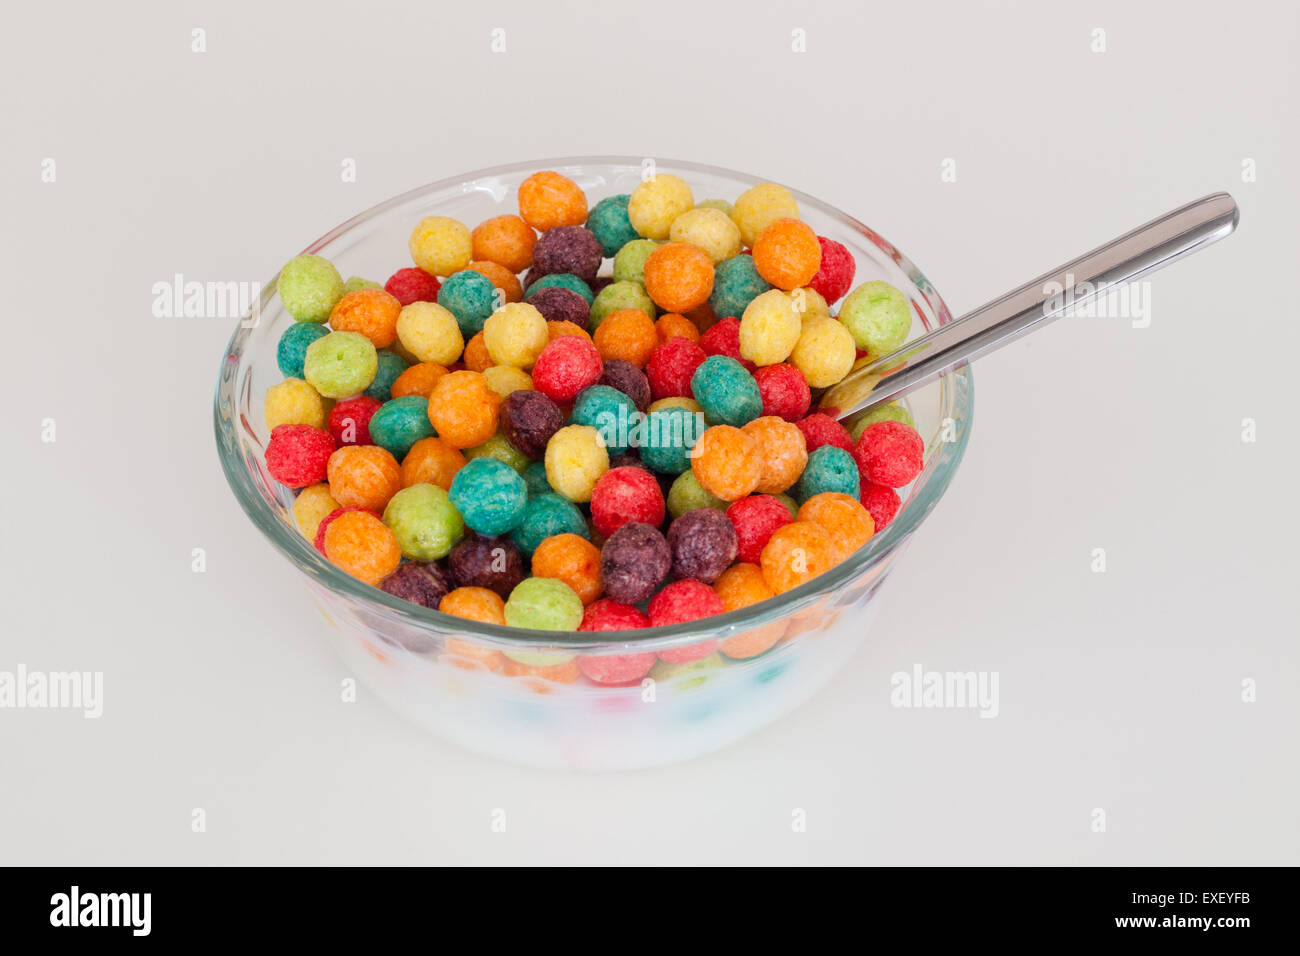 A bowl of colourful Trix cereal, a kiddie breakfast cereal produced by General Mills, Inc. Stock Photo